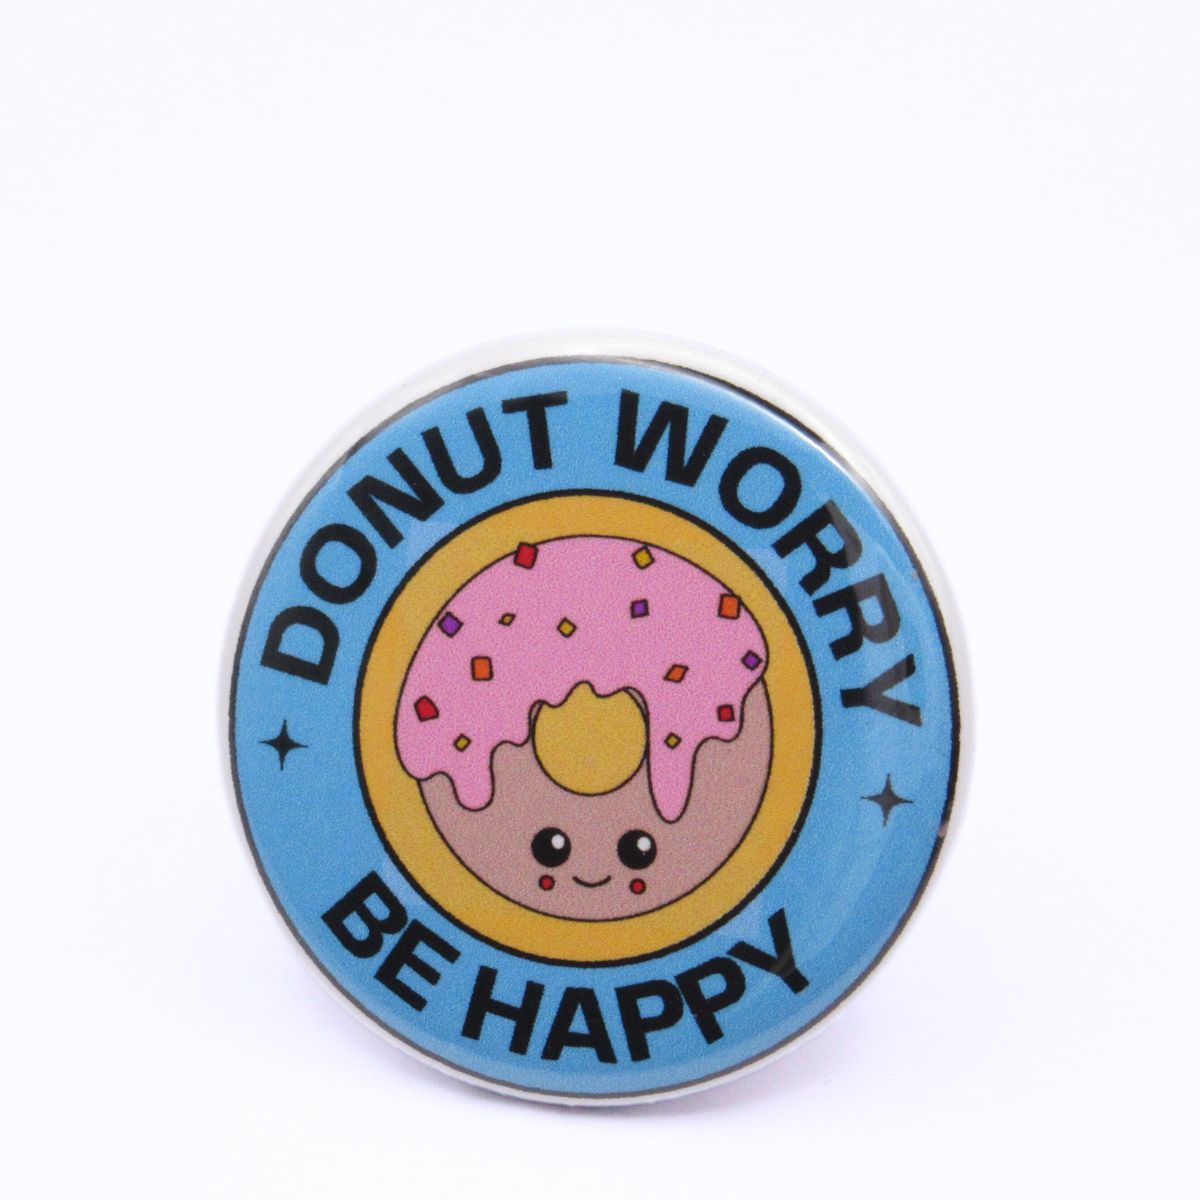 BooBooRoo Pinback Button (i.e. button, badge, pin) of a Cute Kawaii Style donut with the saying "Donut Worry, Be Happy."